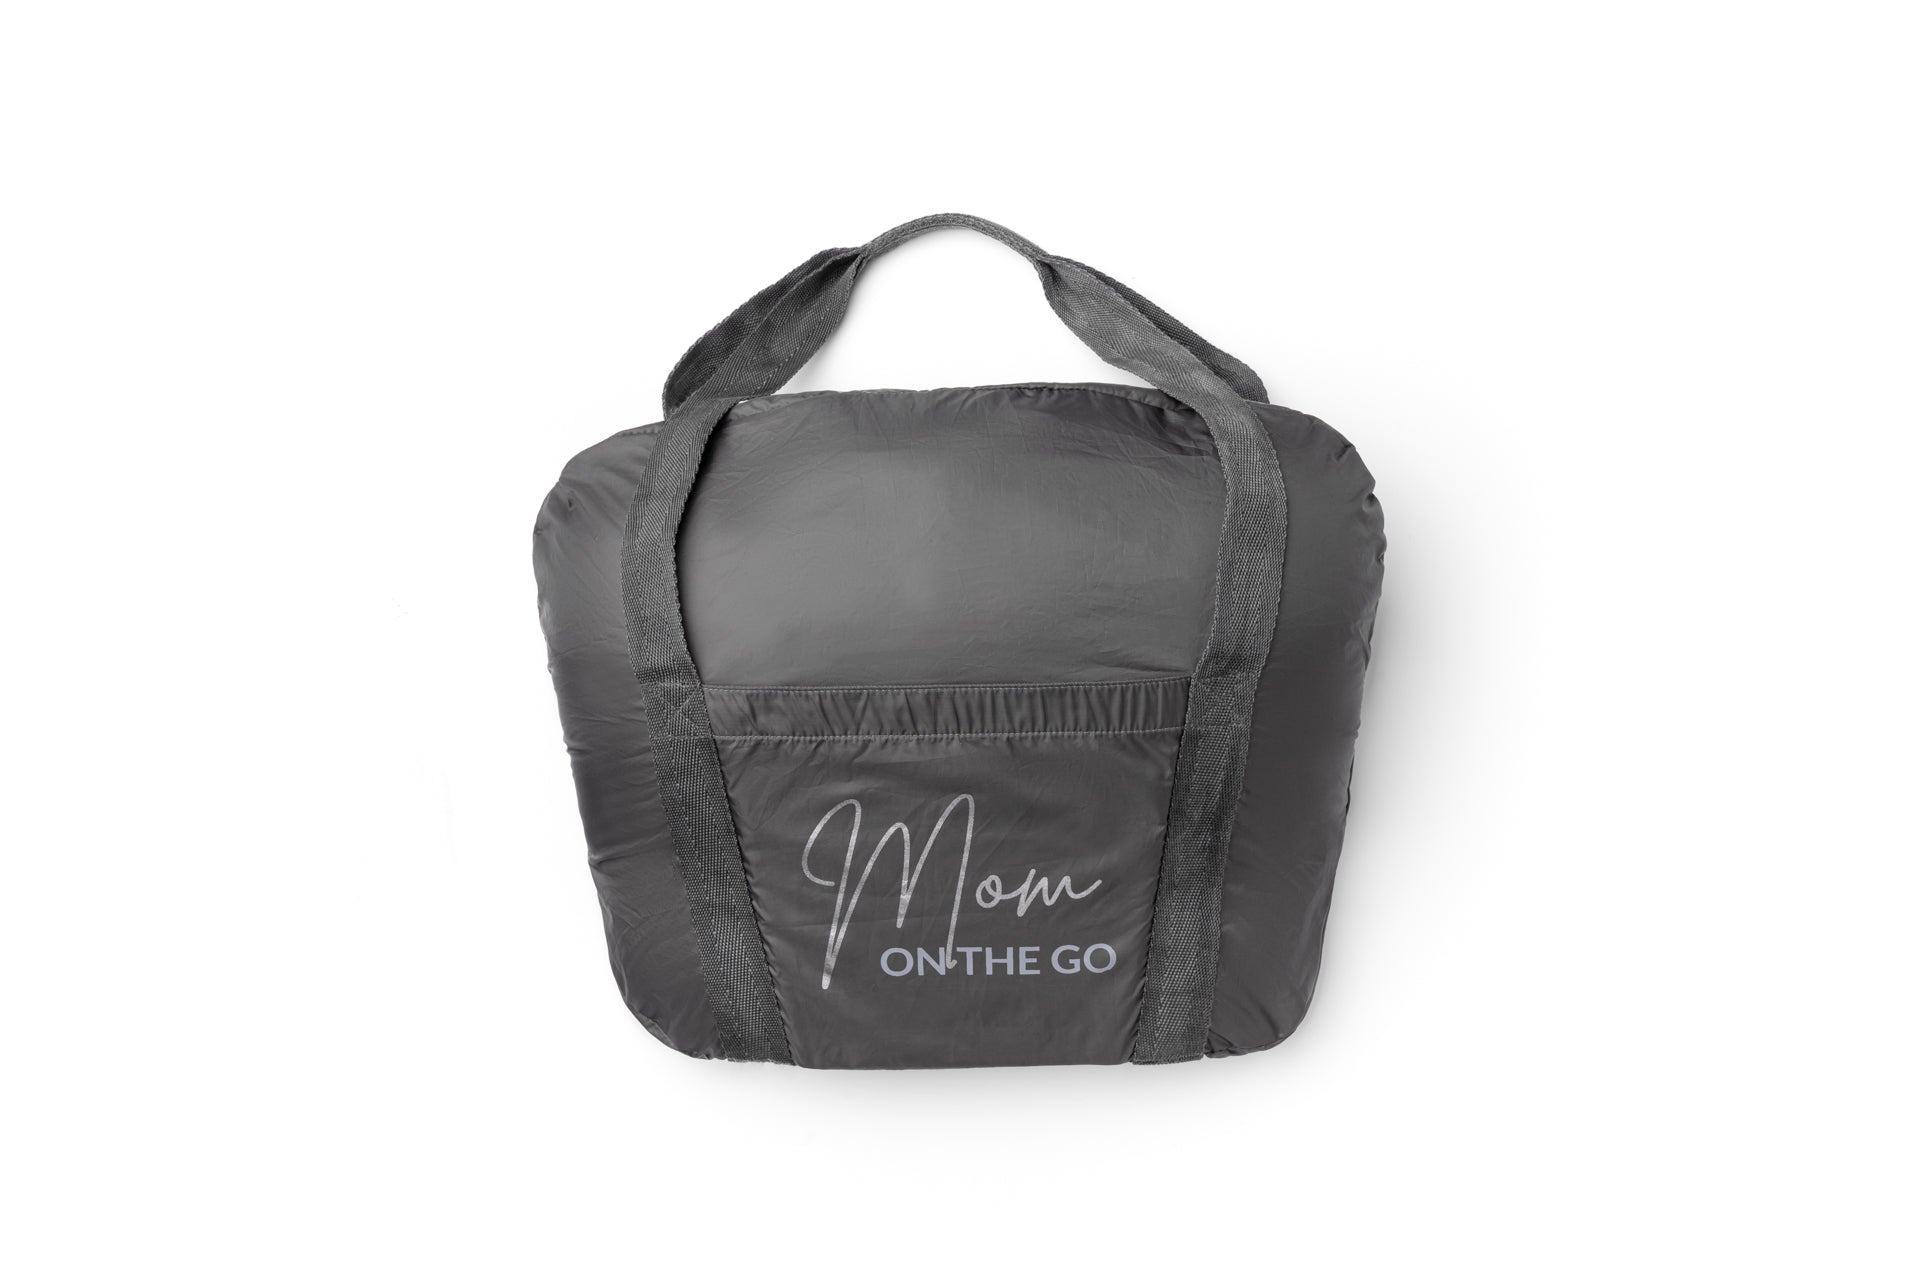 doomoo on the go pillow in the foldable black bag